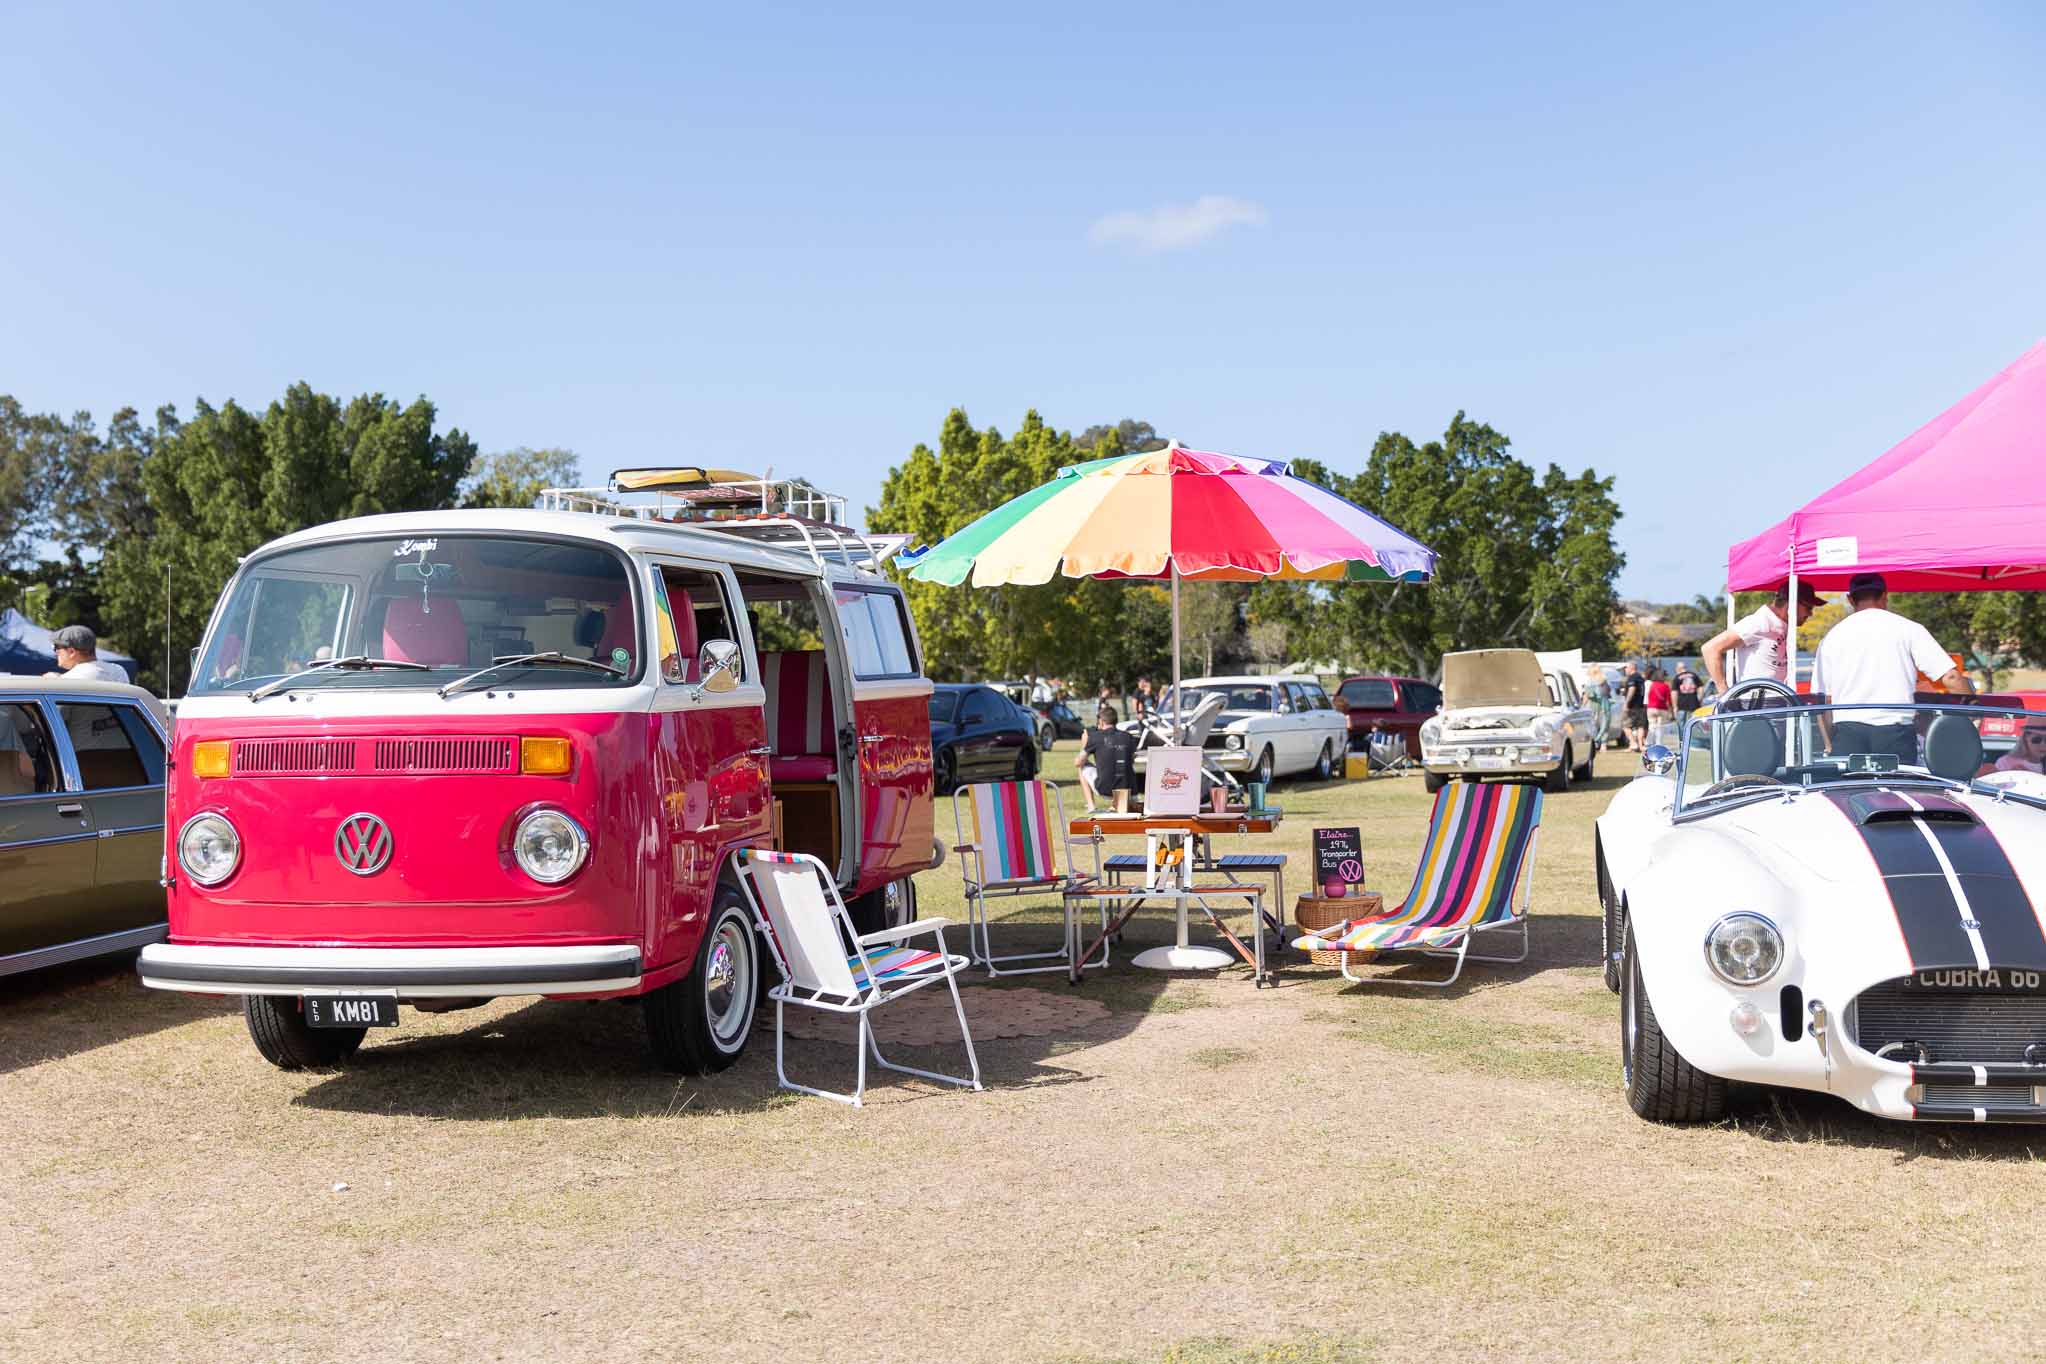 The Queensland Retro Picnic will be held on May 6